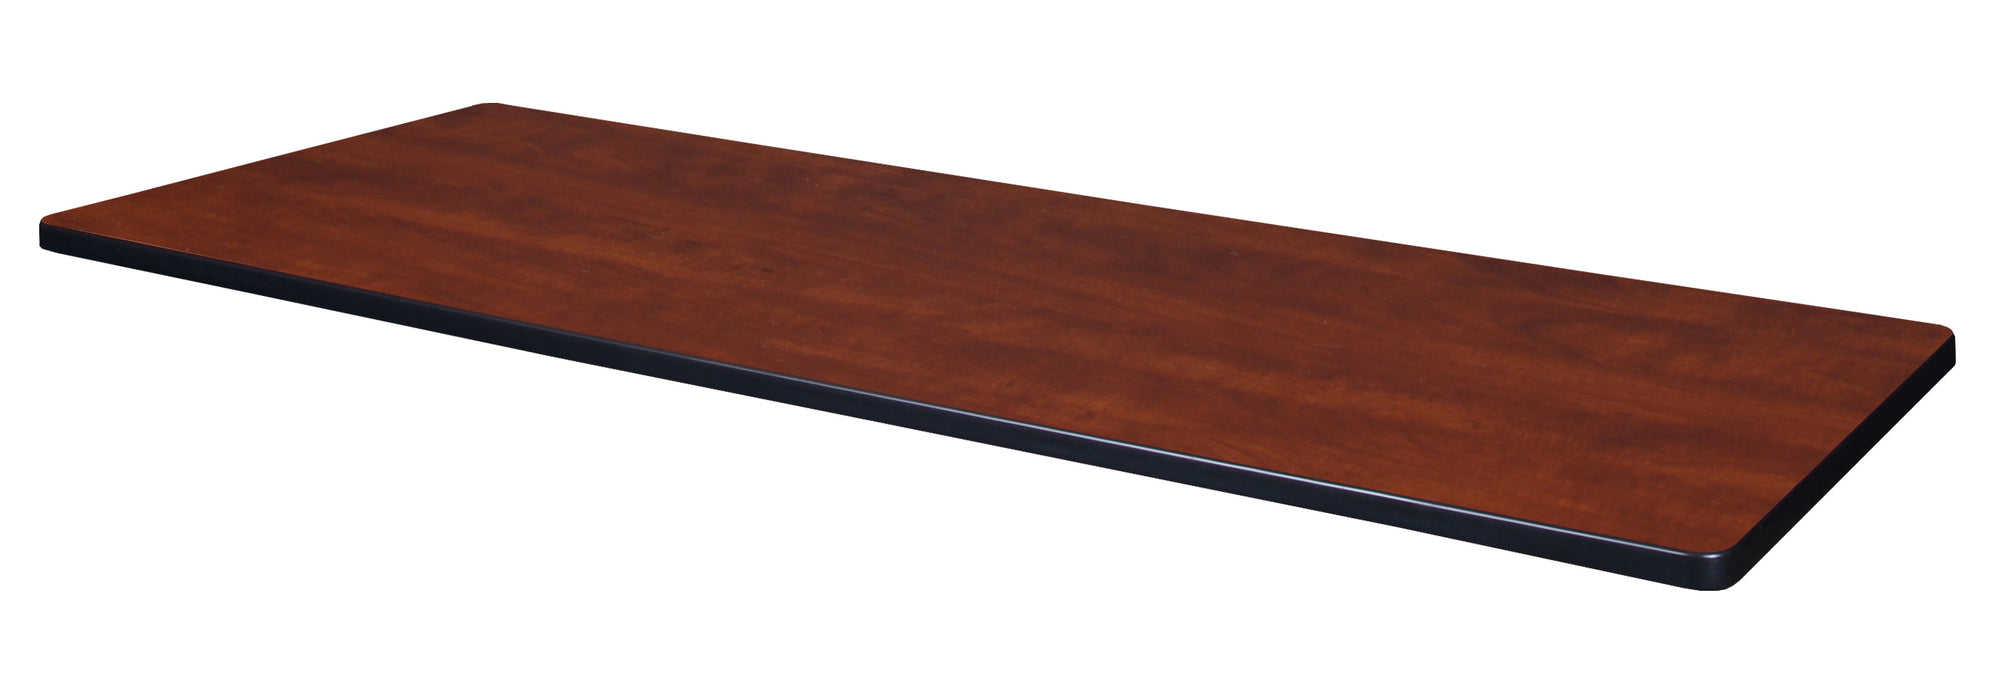 Regency 72 x 24 in Rectangle Double Sided Table Top